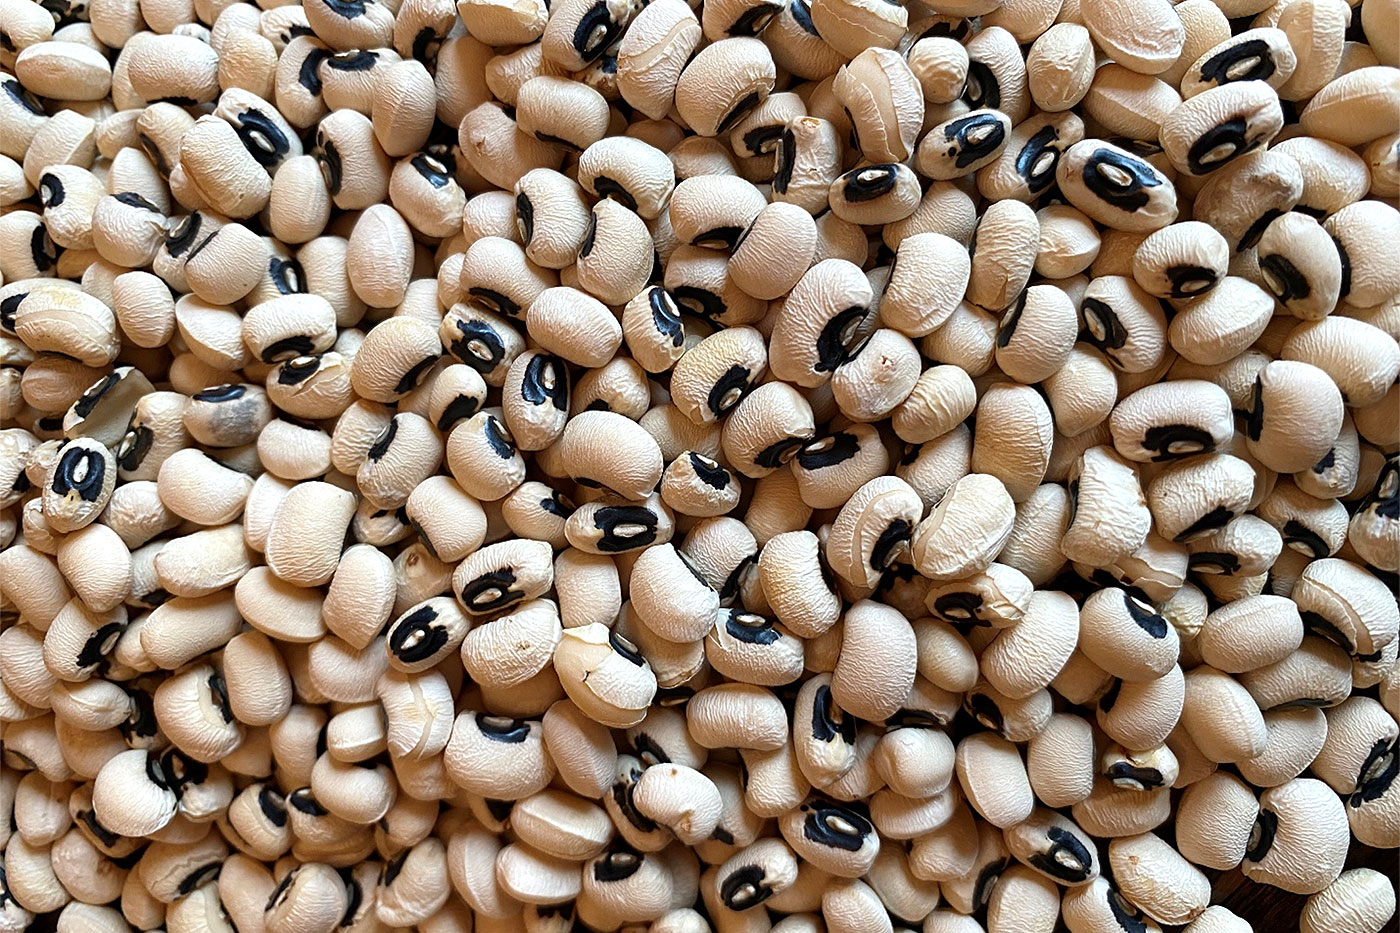 tan beans with black dots on top